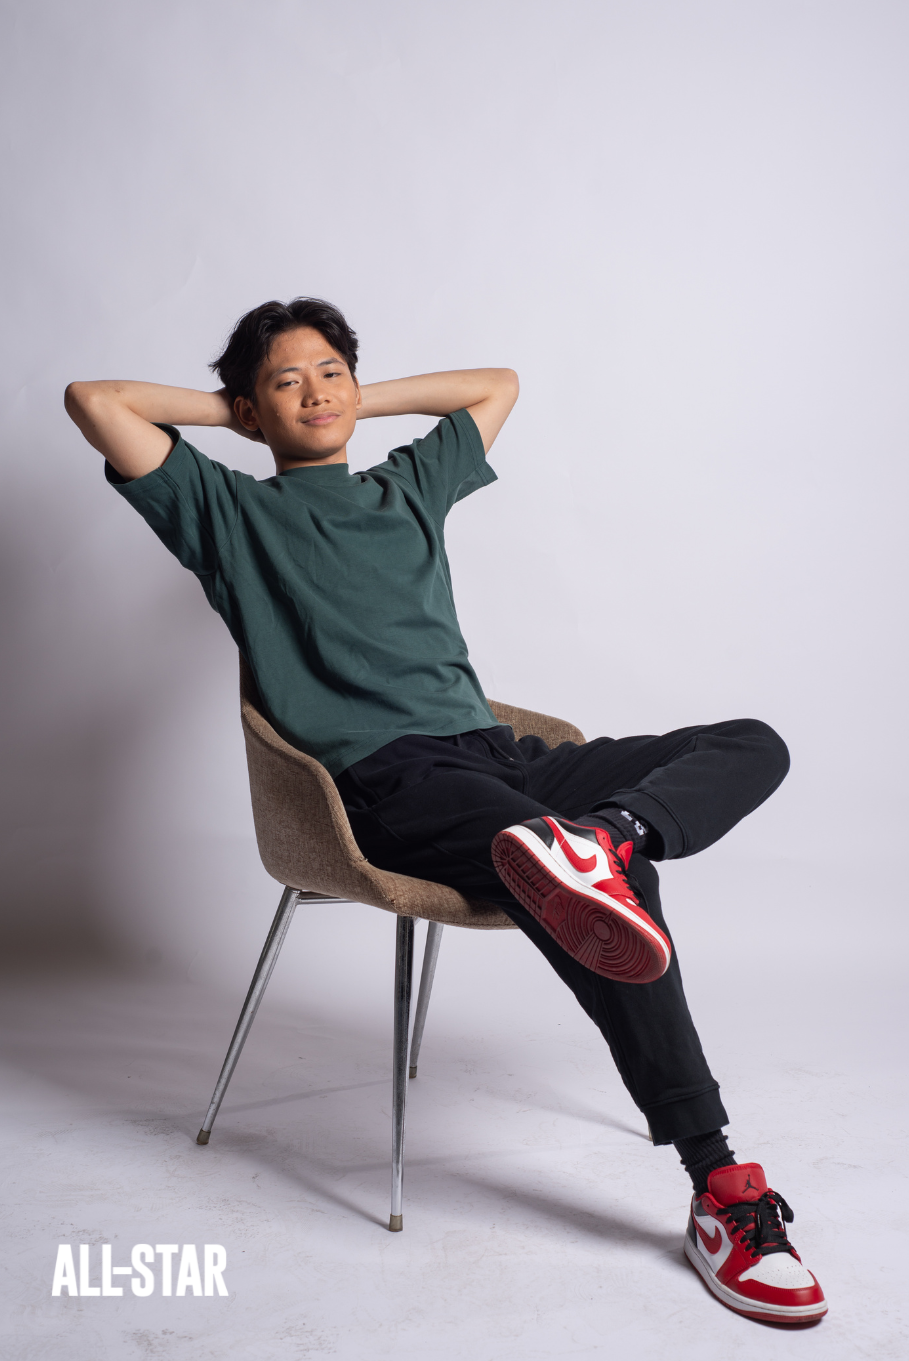 Filipino boy wearing shirt while sitting on a chair, relaxed pose